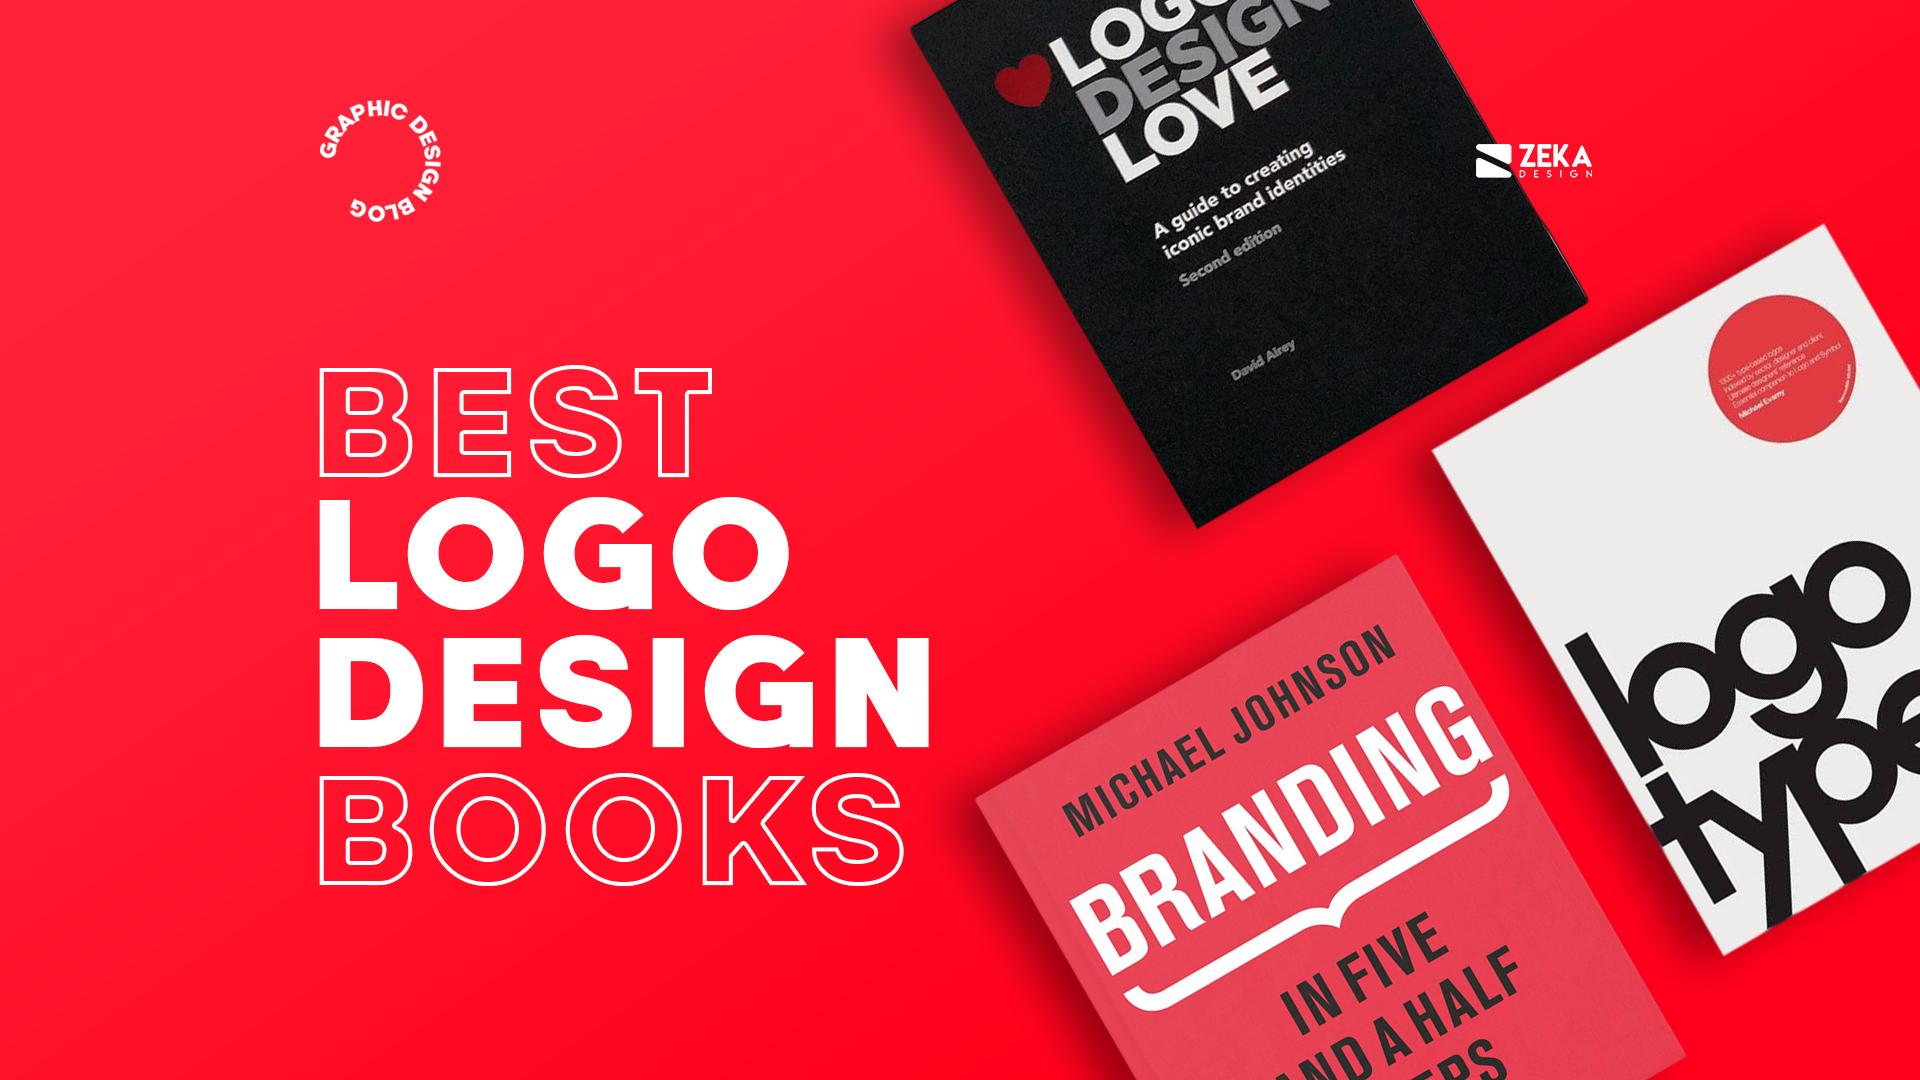 The ultimate guide to logo design